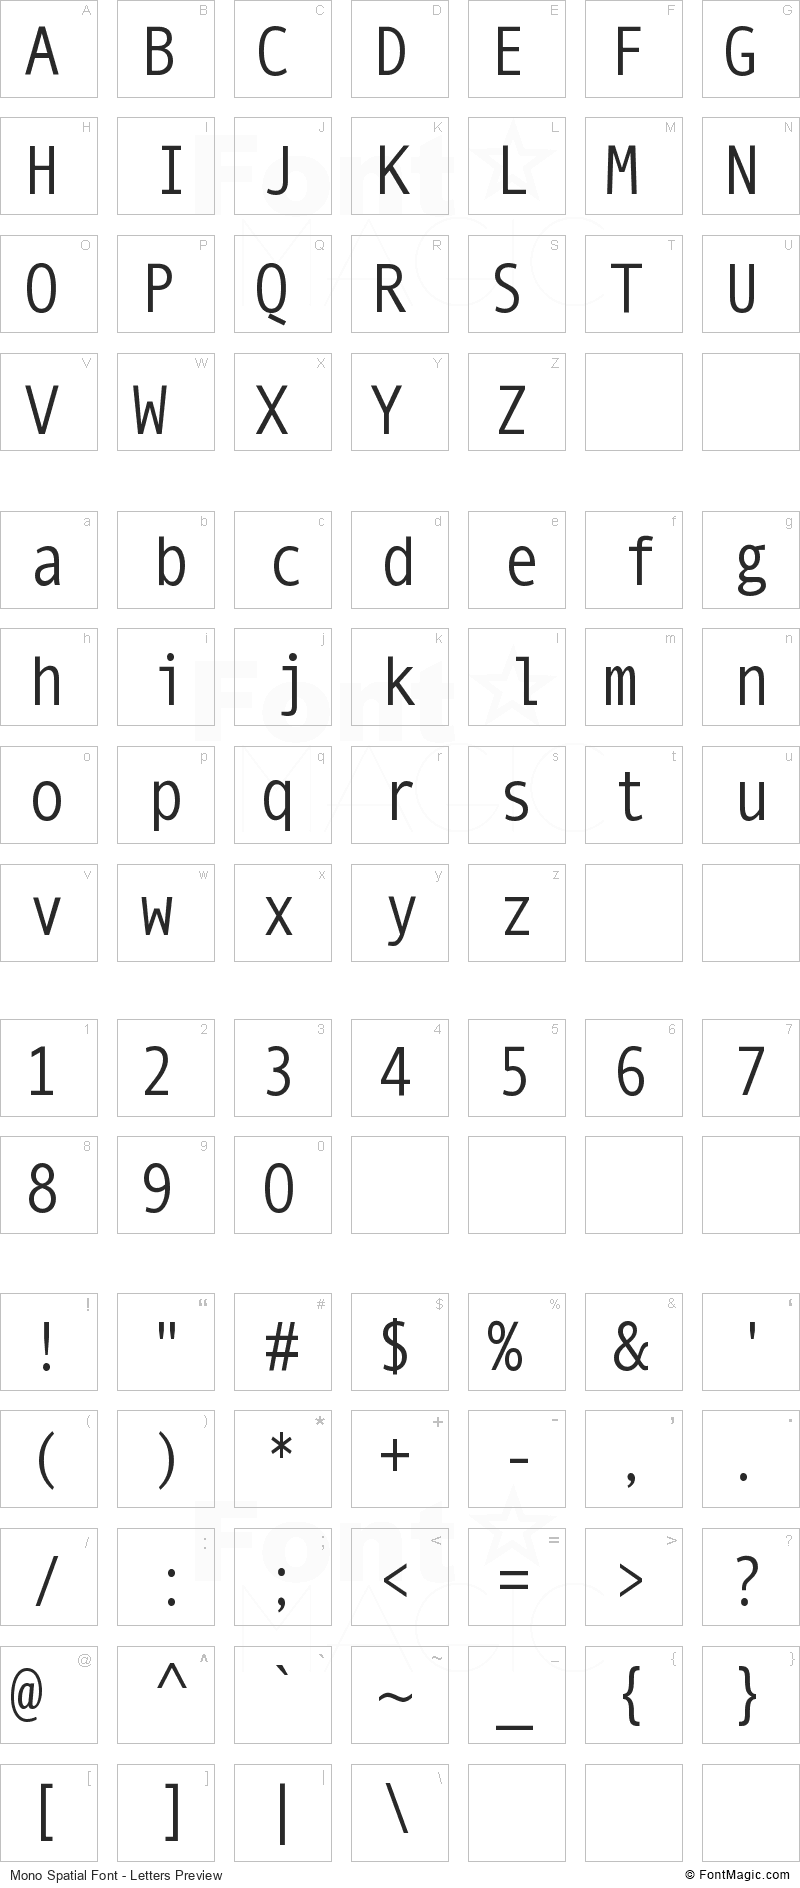 Mono Spatial Font - All Latters Preview Chart